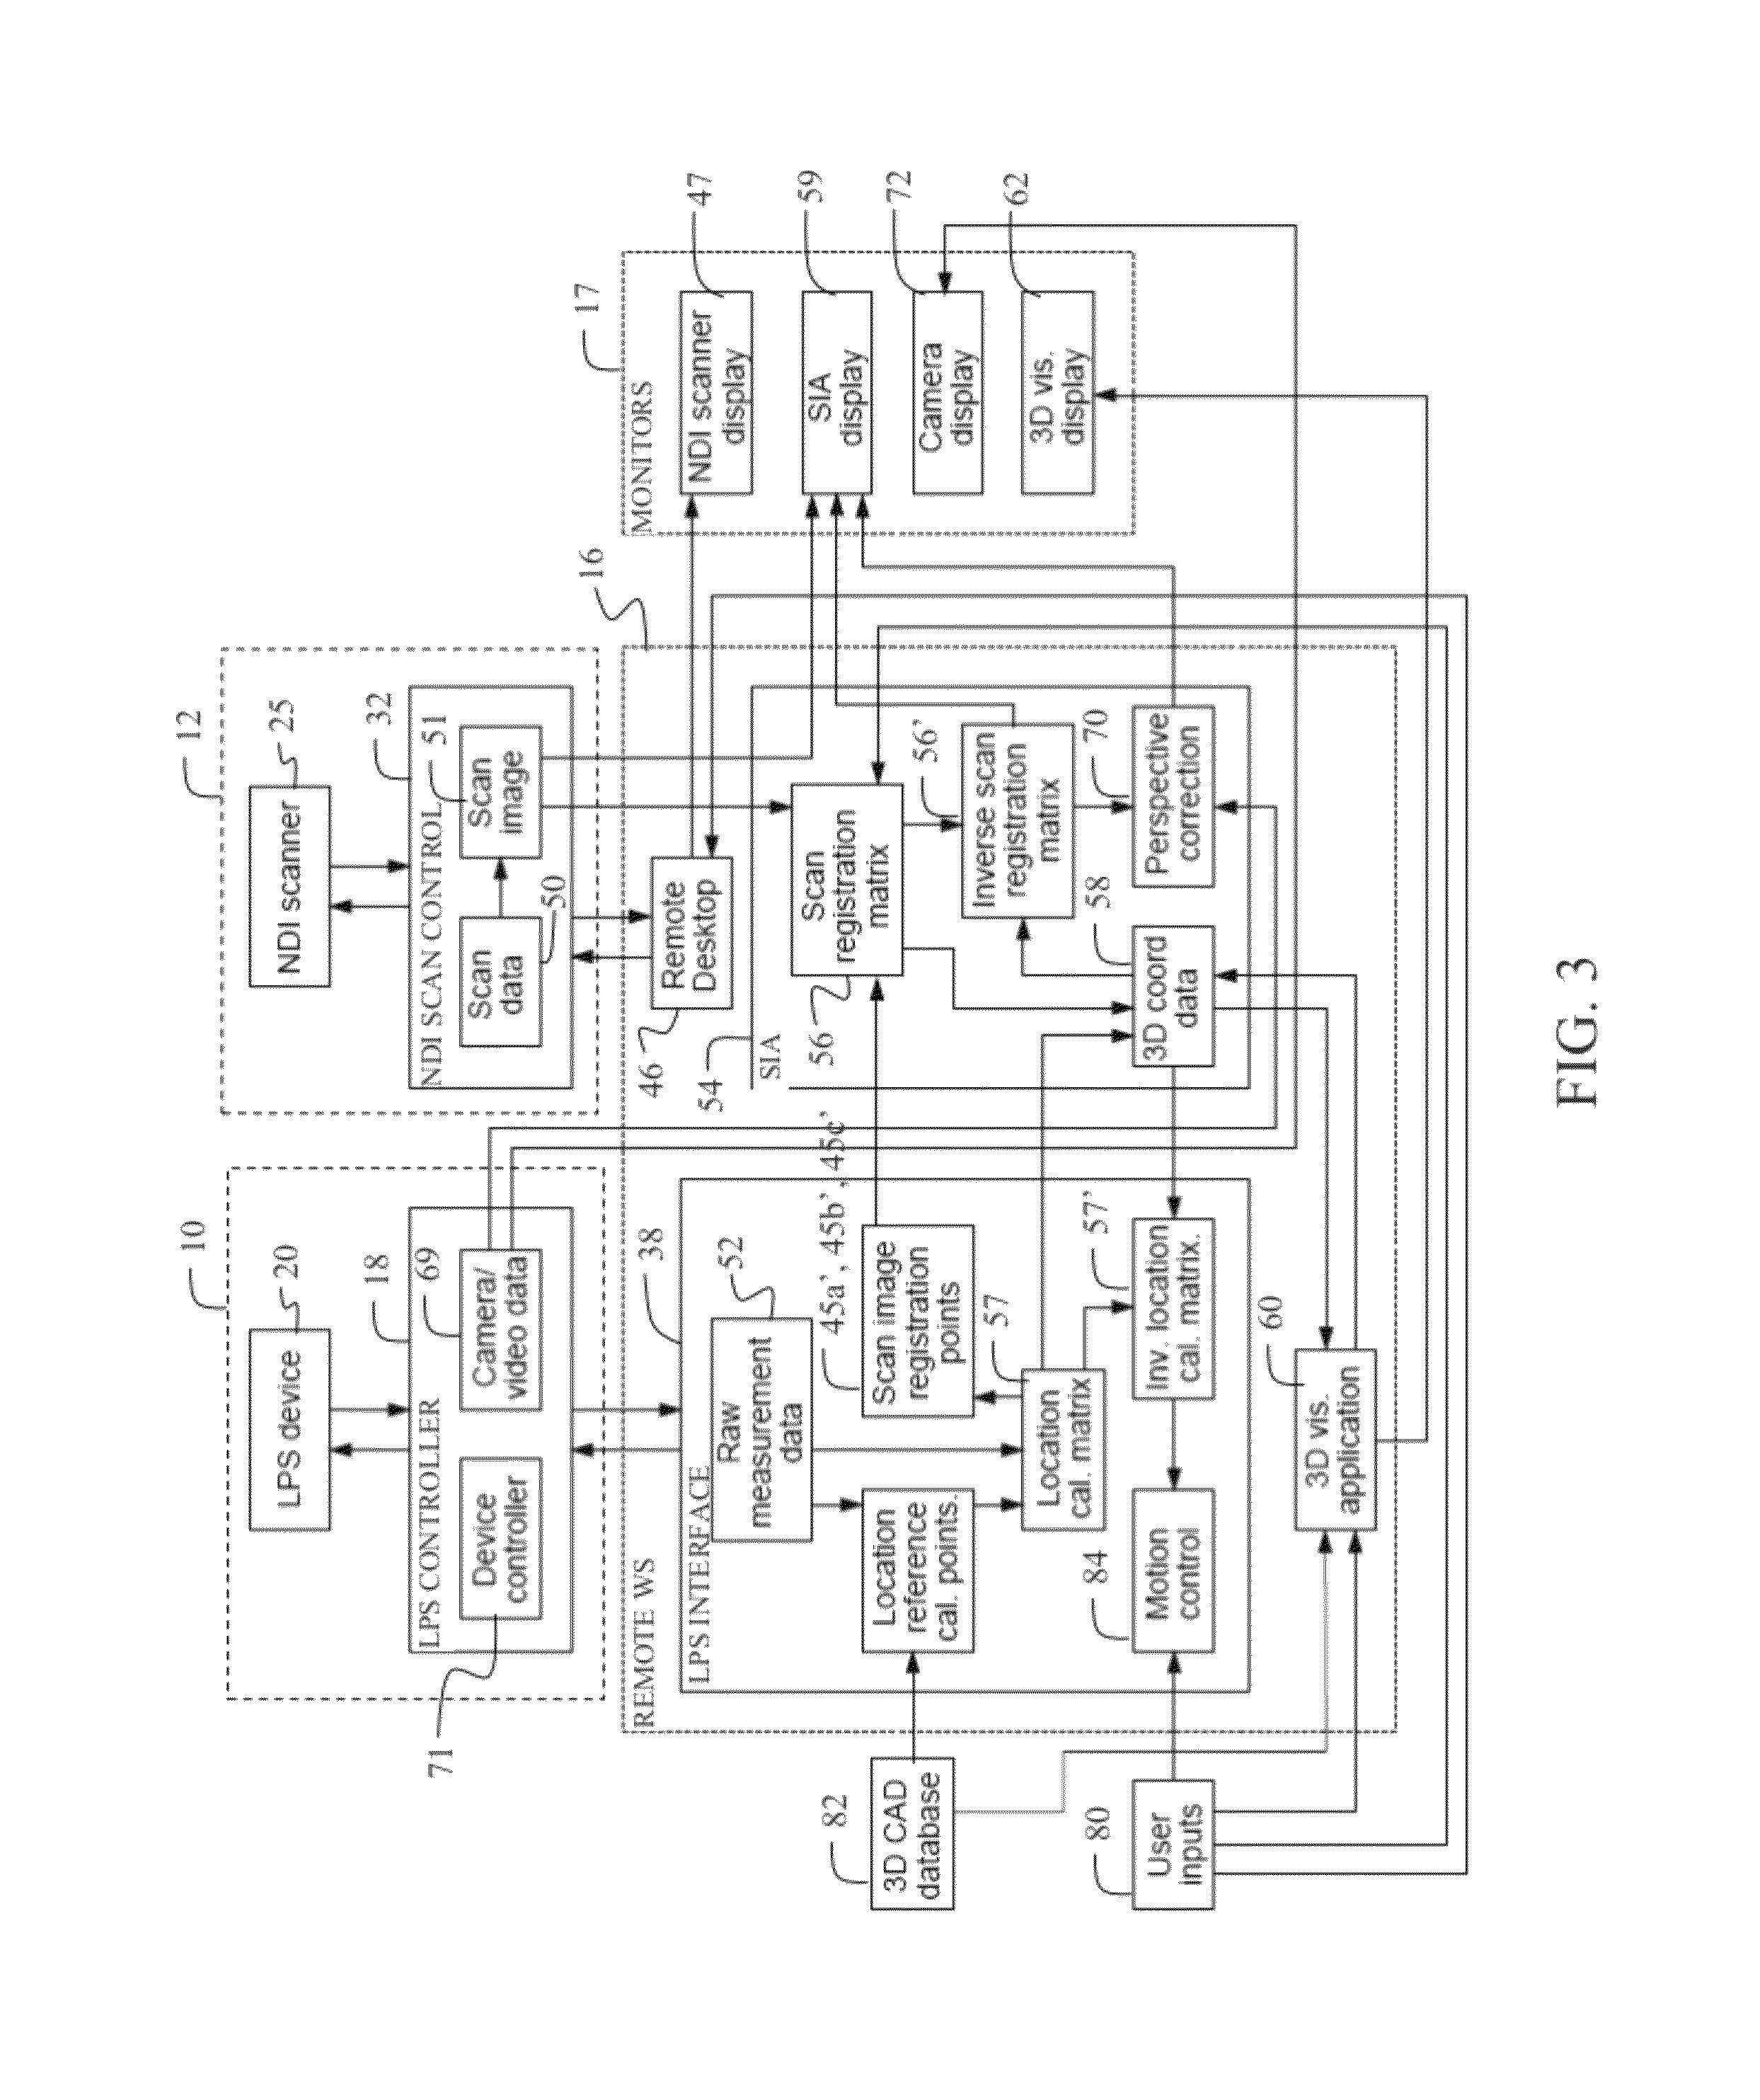 Advanced remote nondestructive inspection system and process